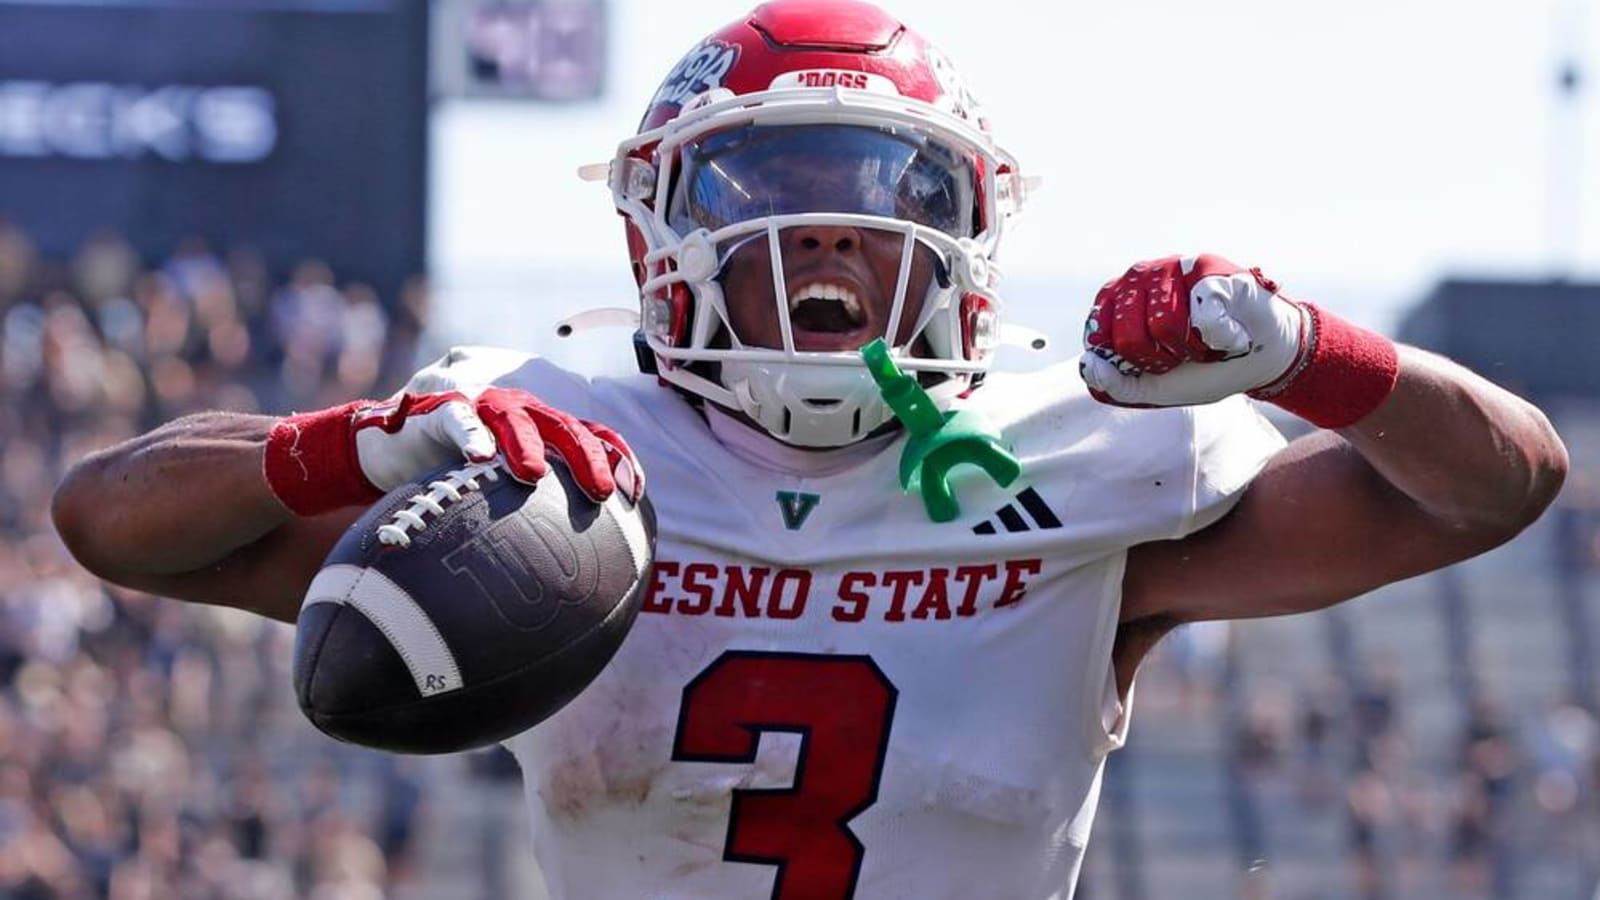 Fresno State Opens Against Michigan for First Time